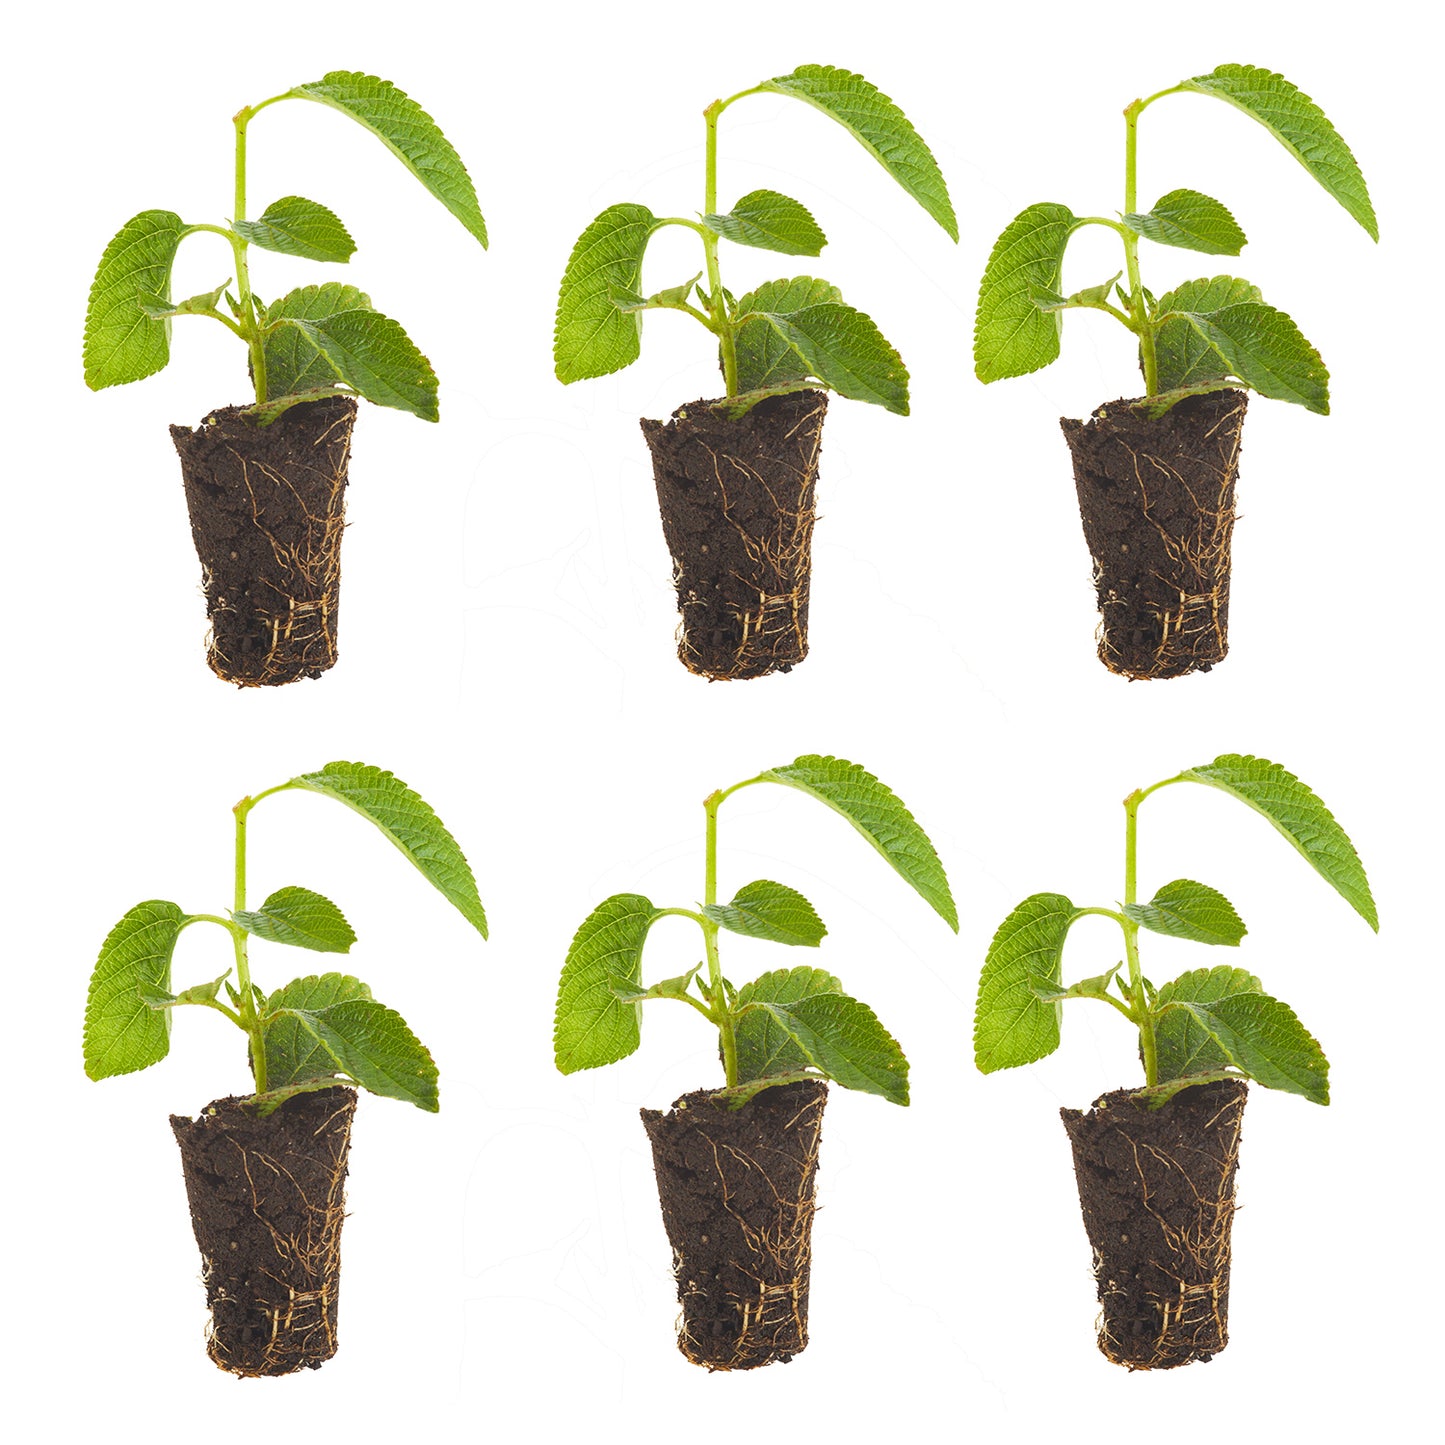 Lantana PassionFruit Plantlings Live Baby Plants 1-3in., 6-Pack